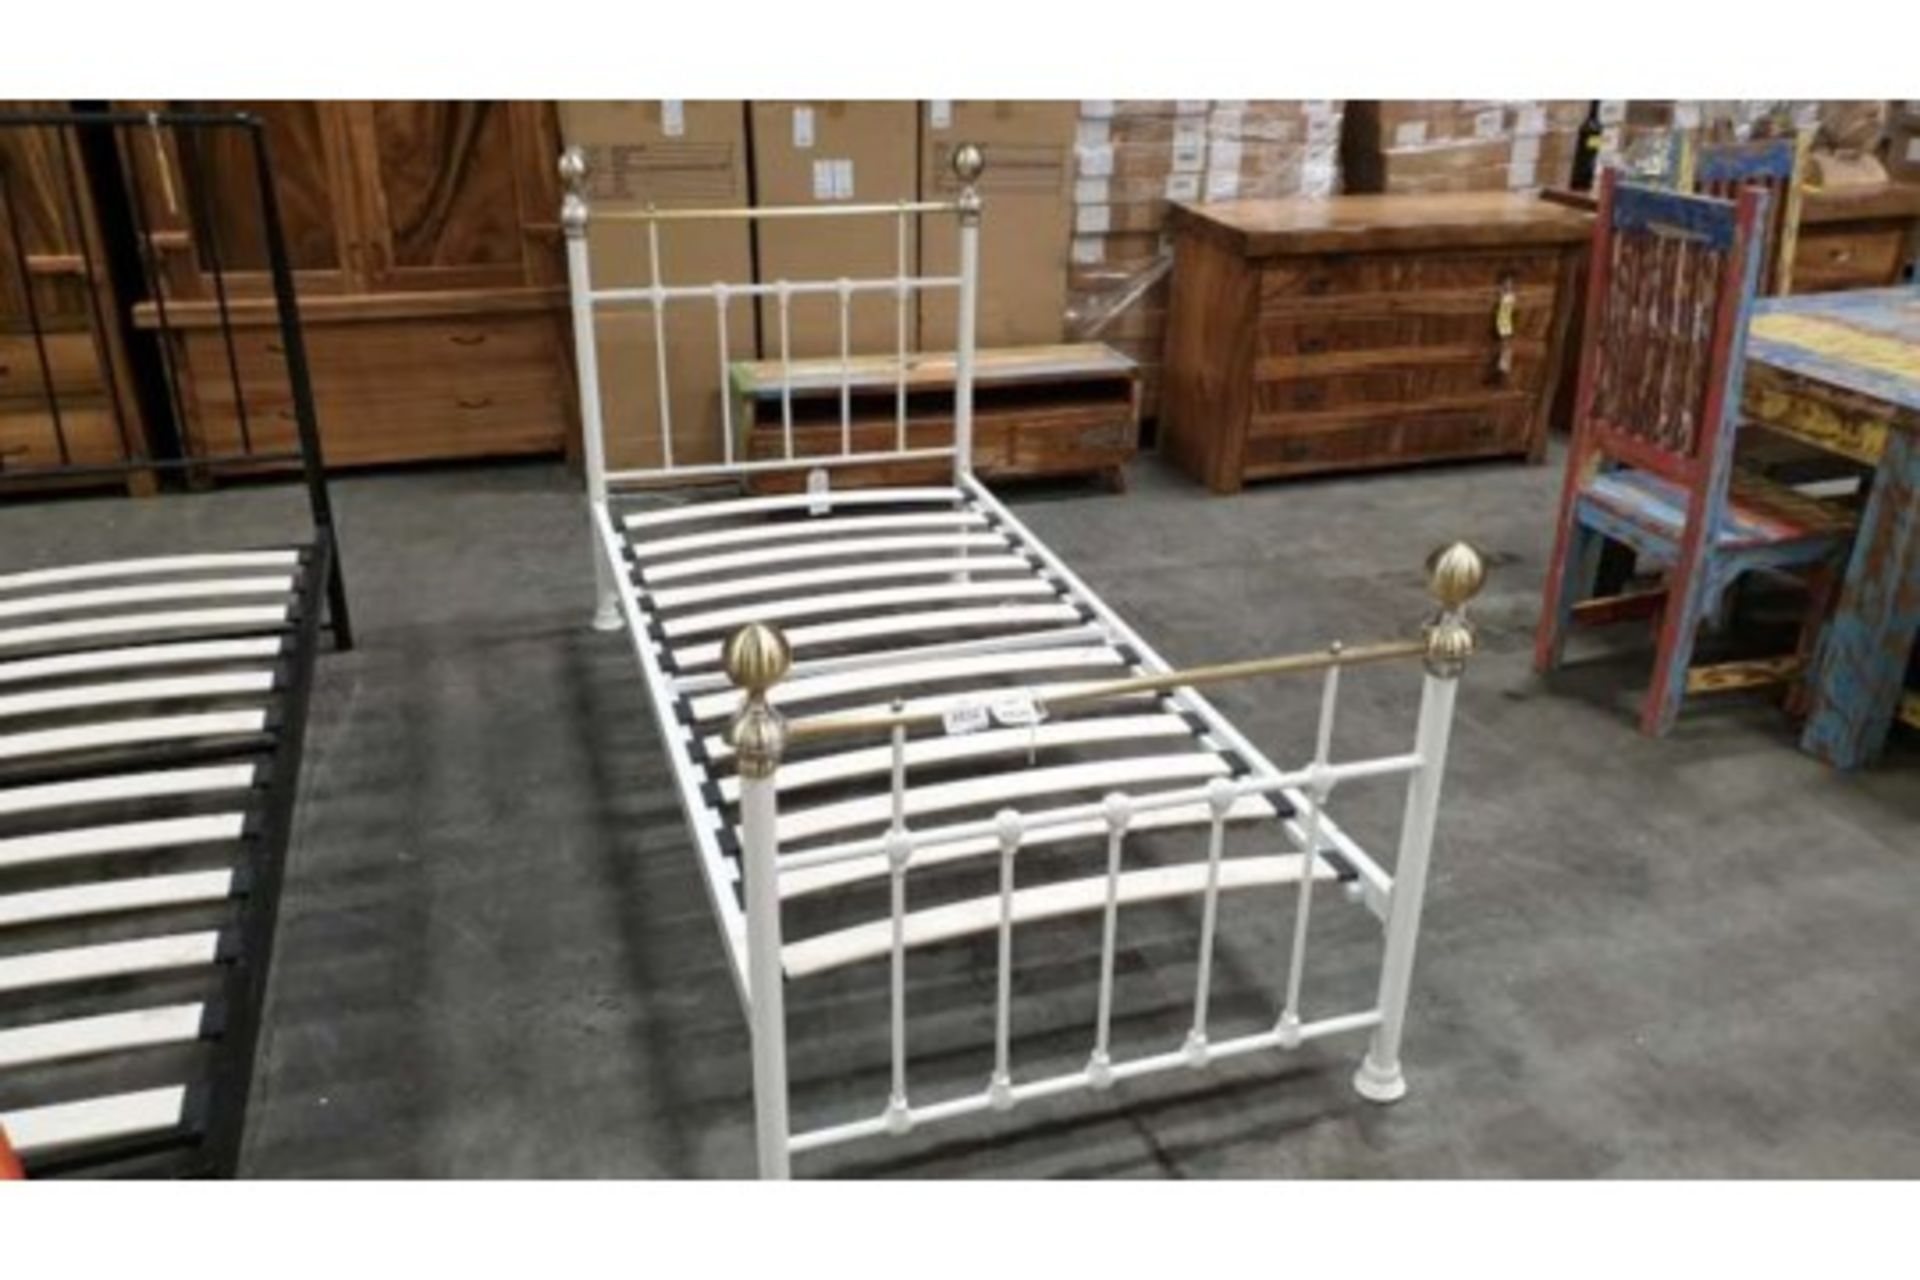 METAL FRAMED SINGLE BED WITH SLATS IN 2 BOXES